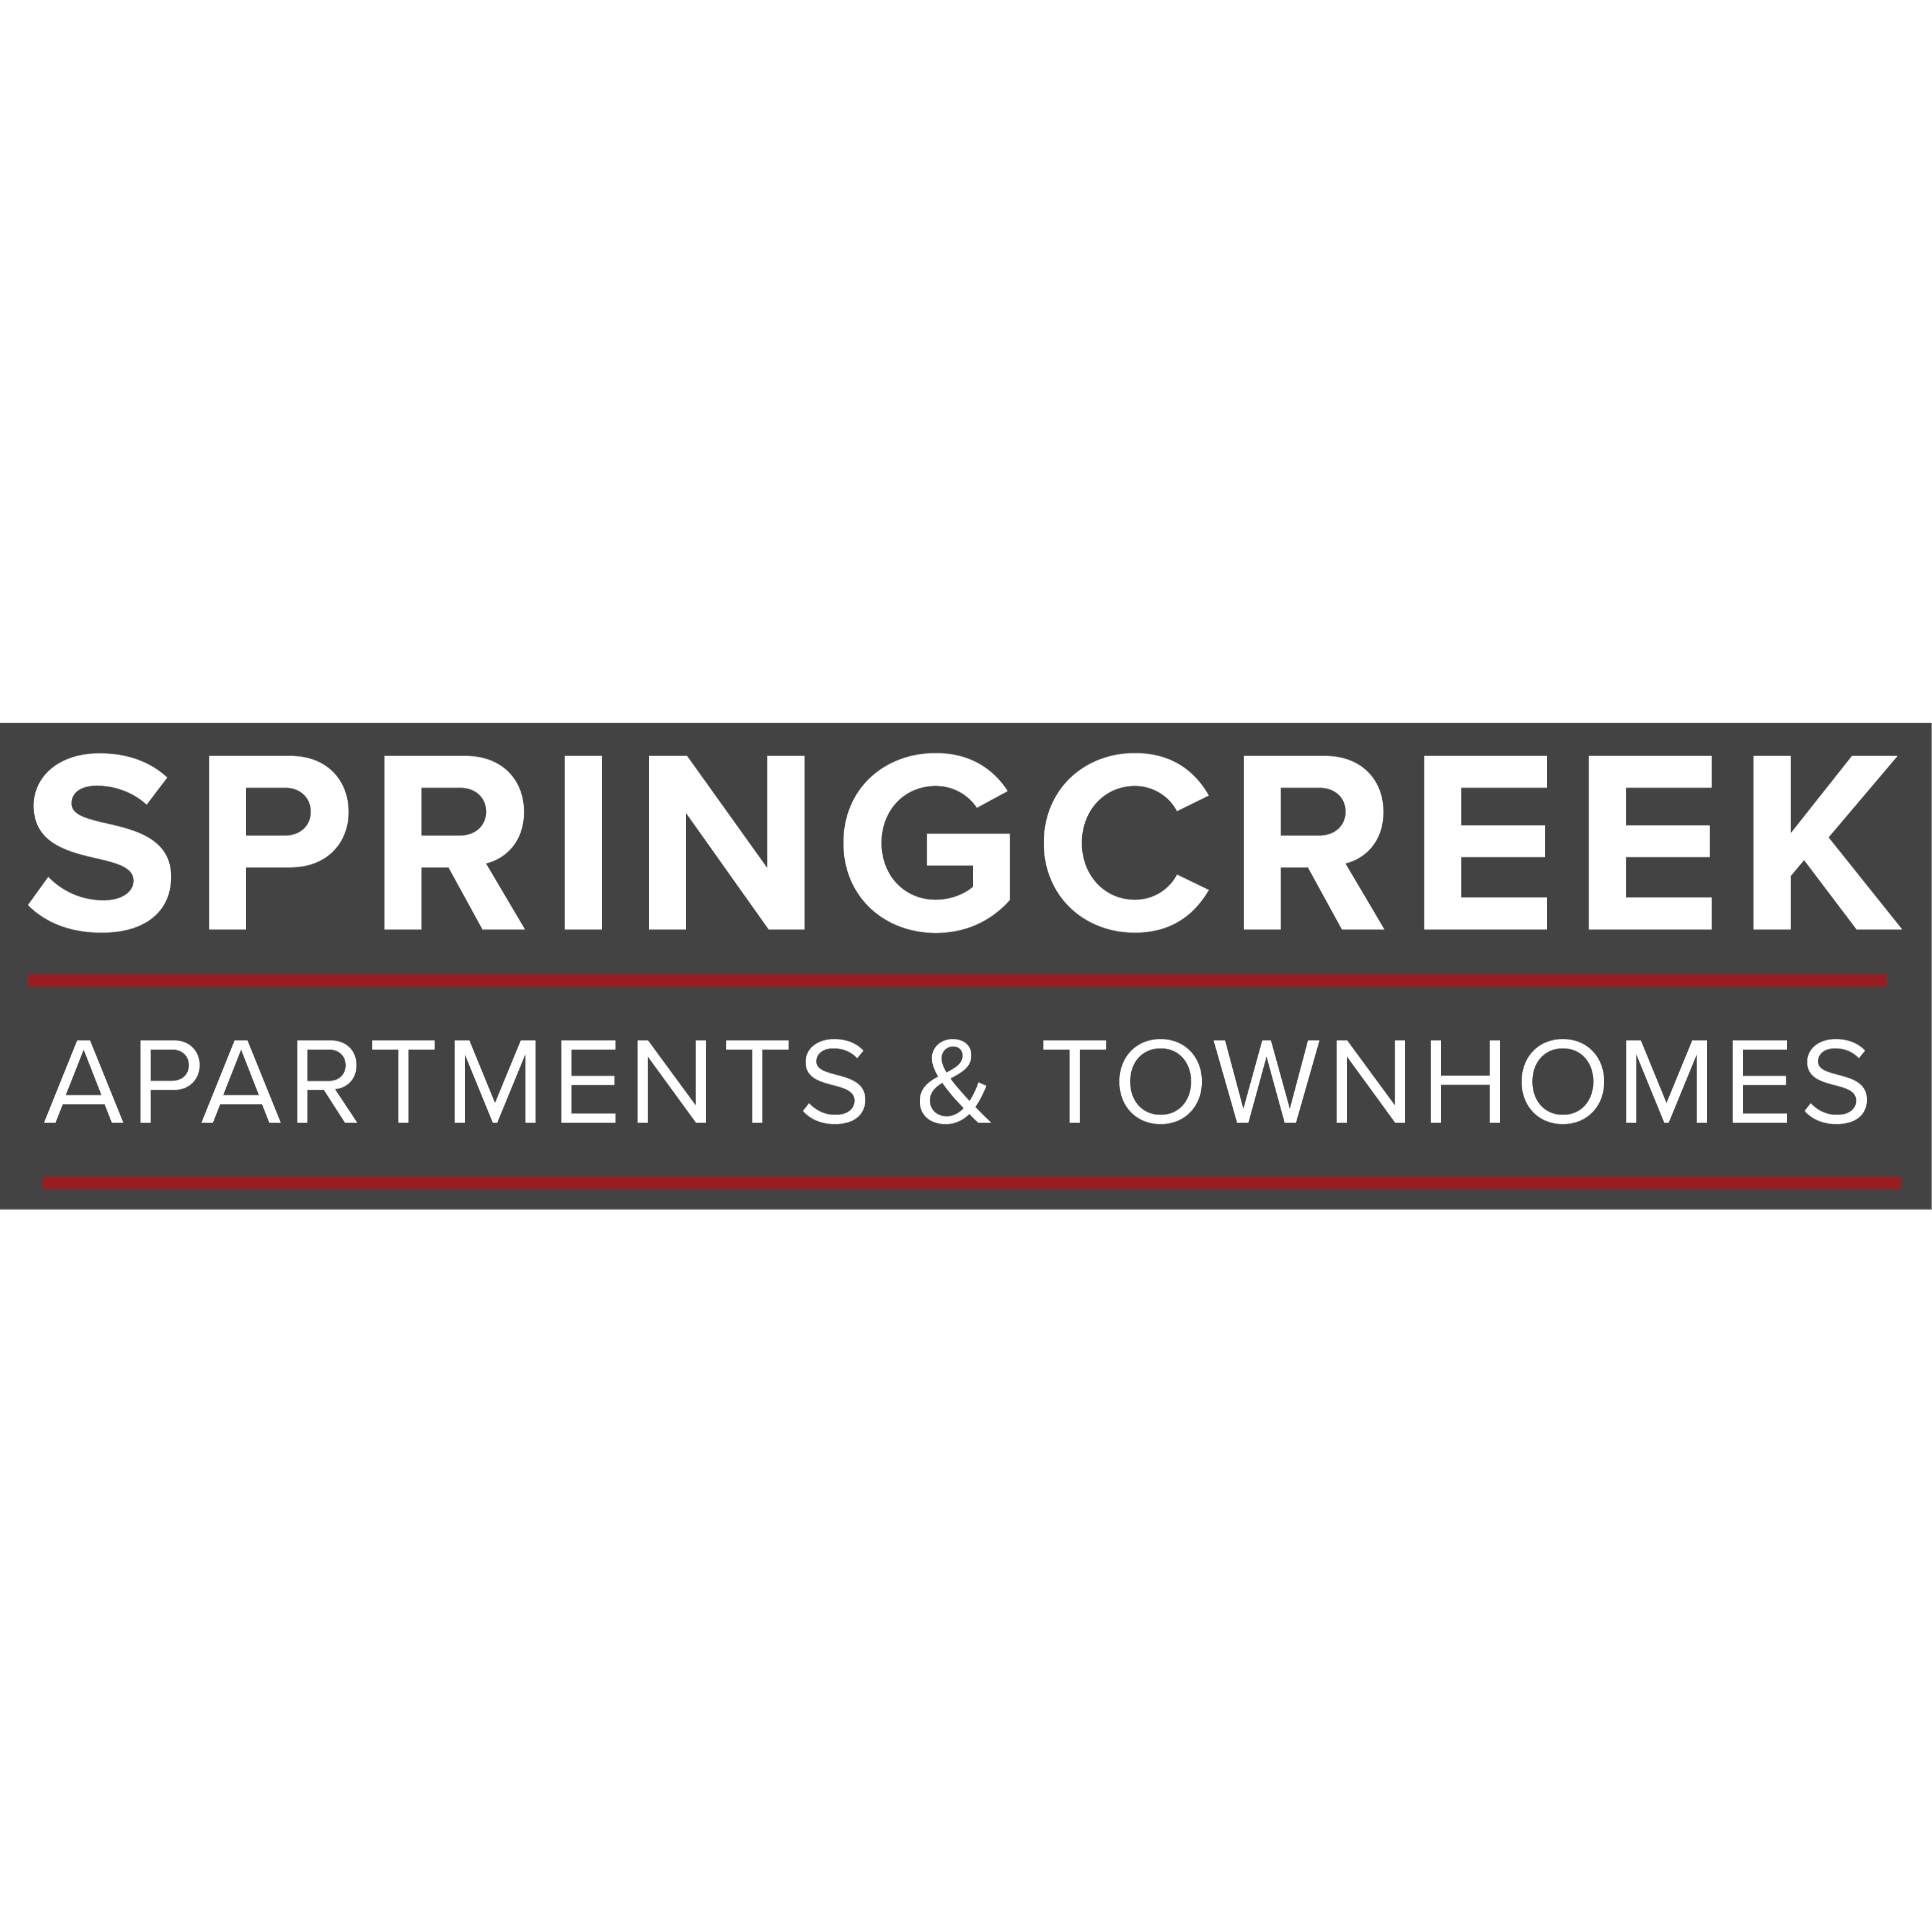 Springcreek Apartments and Townhomes - Derby, KS 67037 - (316)395-5751 | ShowMeLocal.com